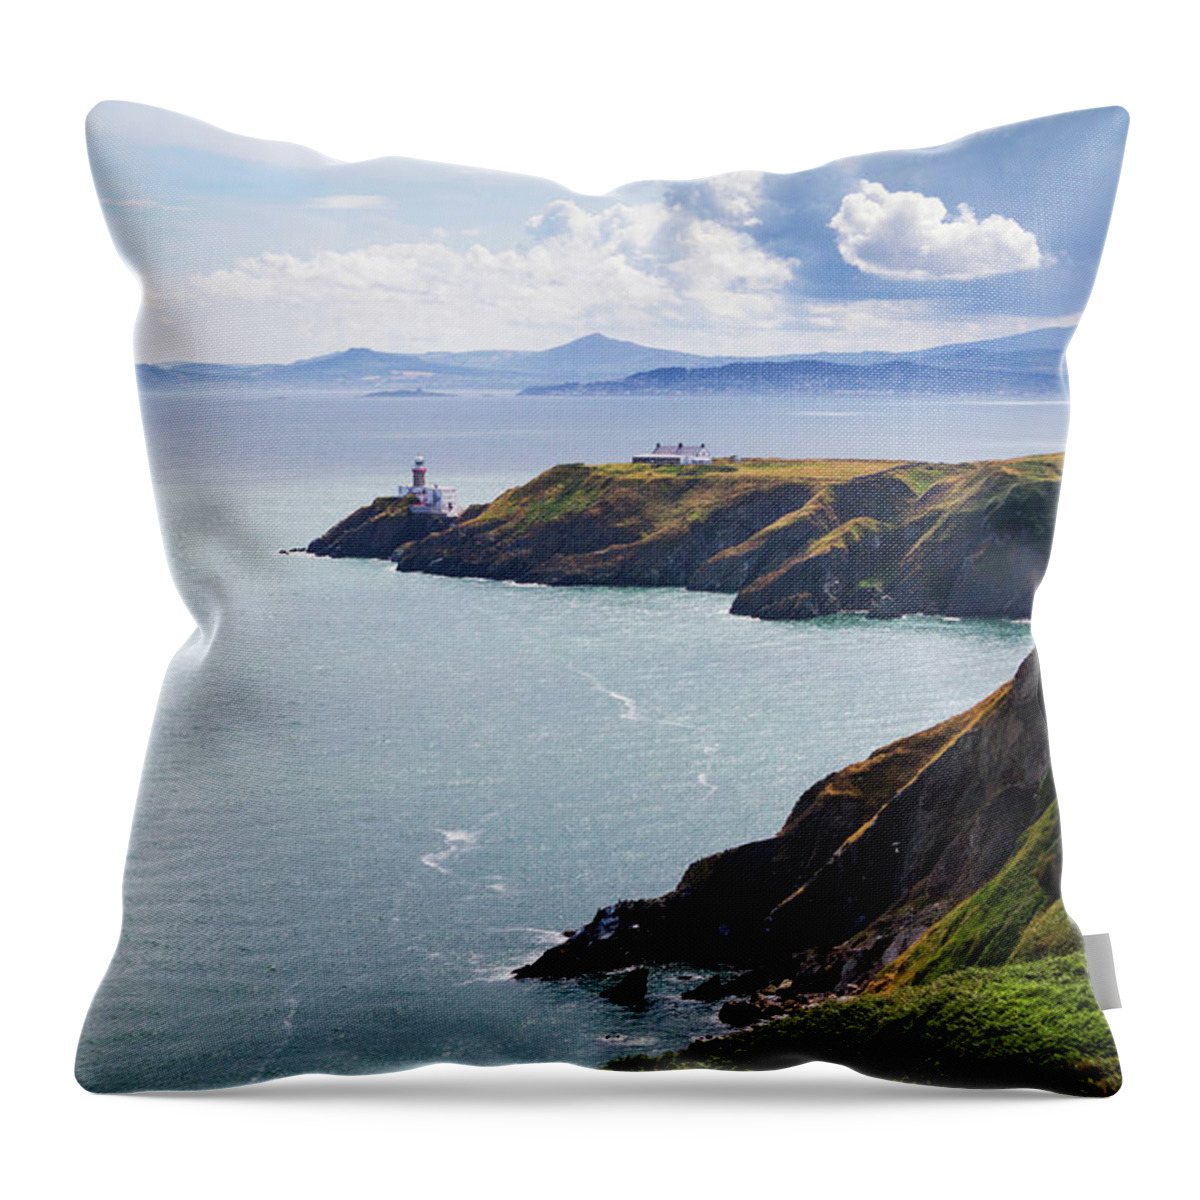 Dublin Throw Pillow featuring the photograph Peninsula Of Howth And Baily Lighthouse by Maciej Frolow